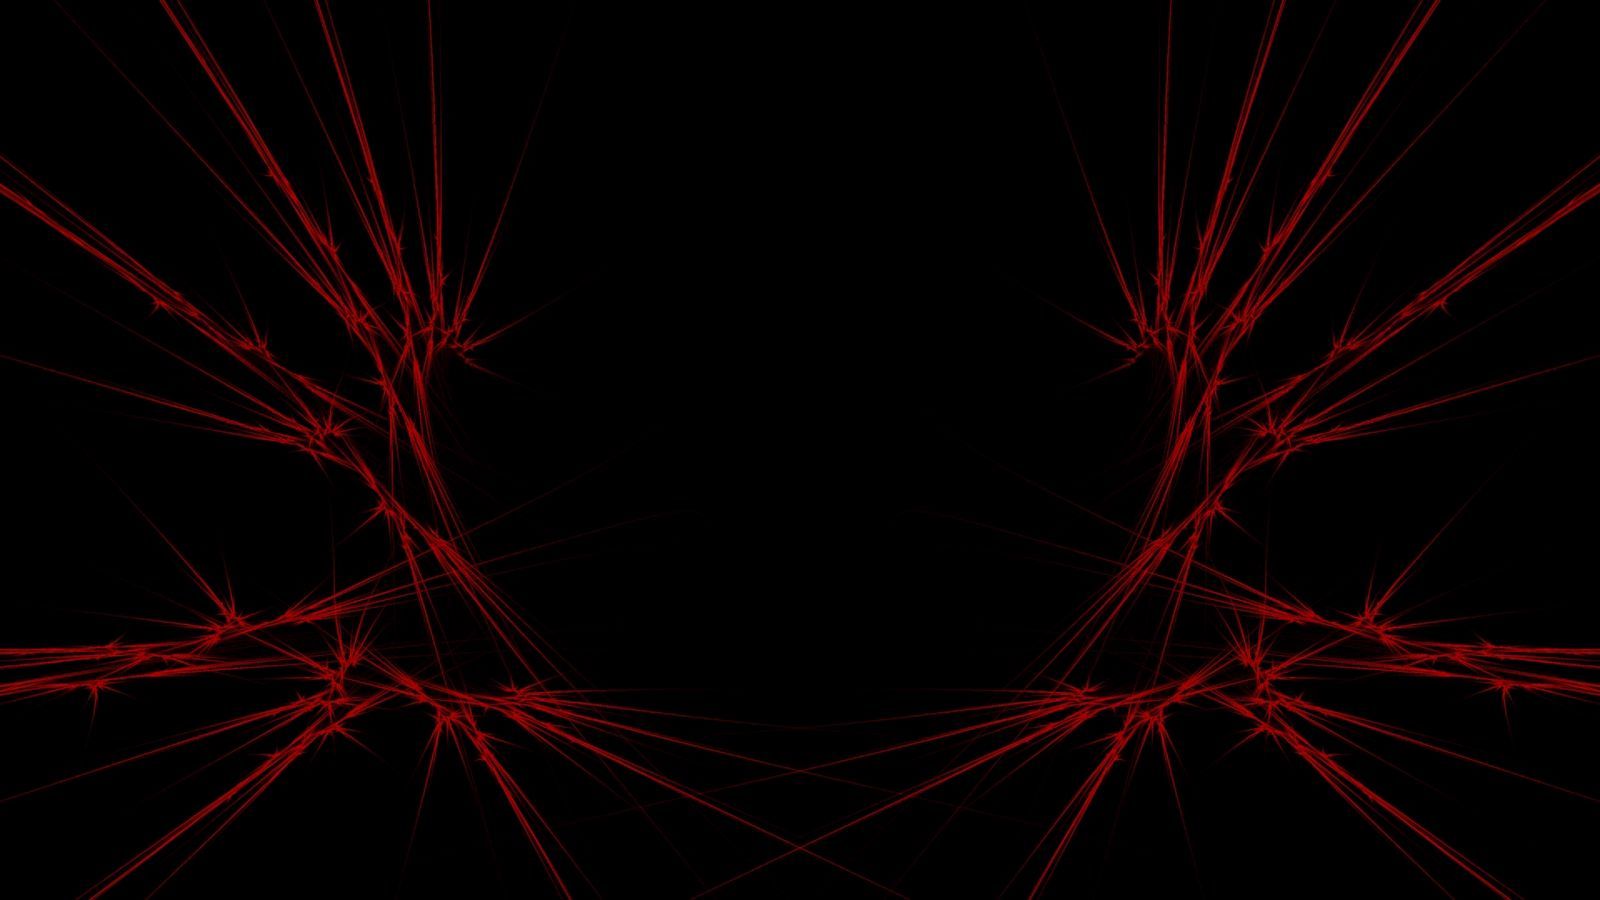 Download wallpaper 1600x900 red, black, abstract widescreen 16:9 HD background